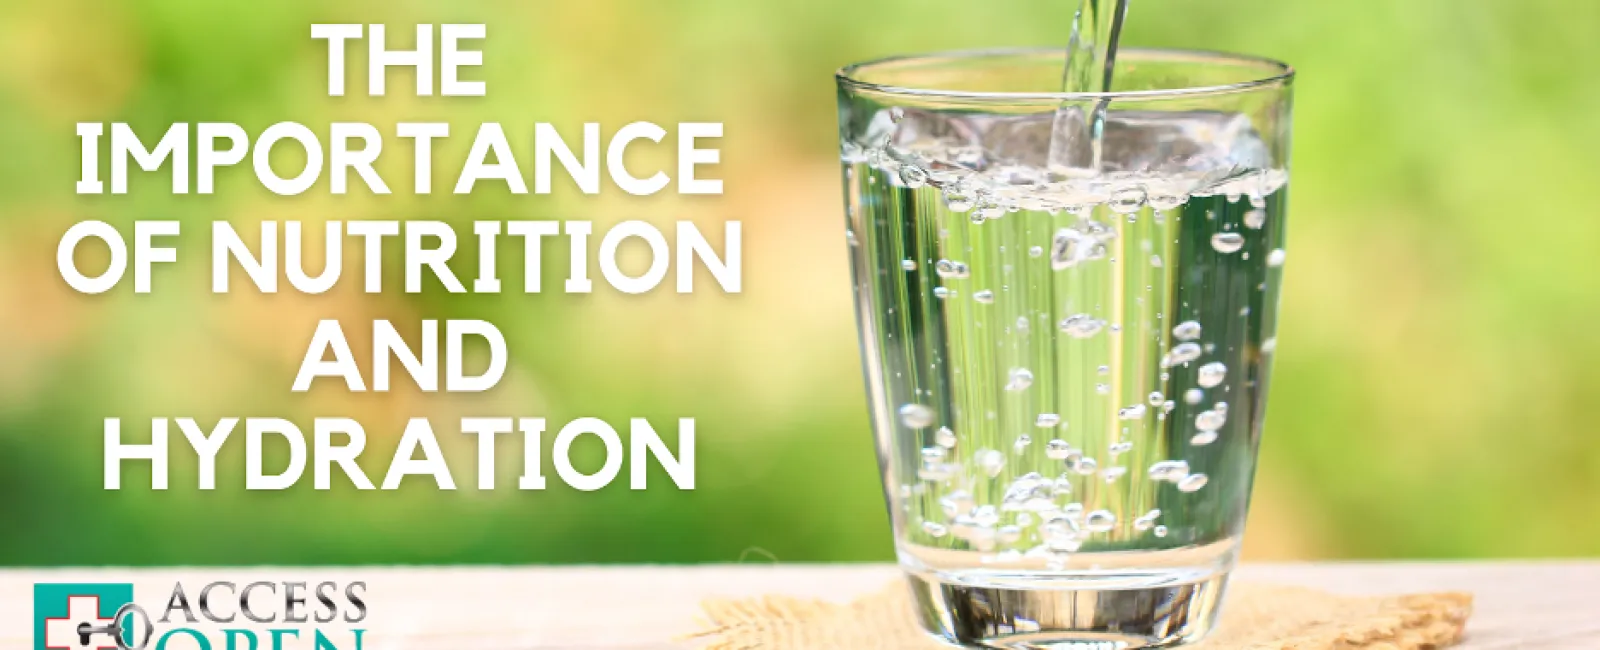 The Importance of Nutrition and Hydration